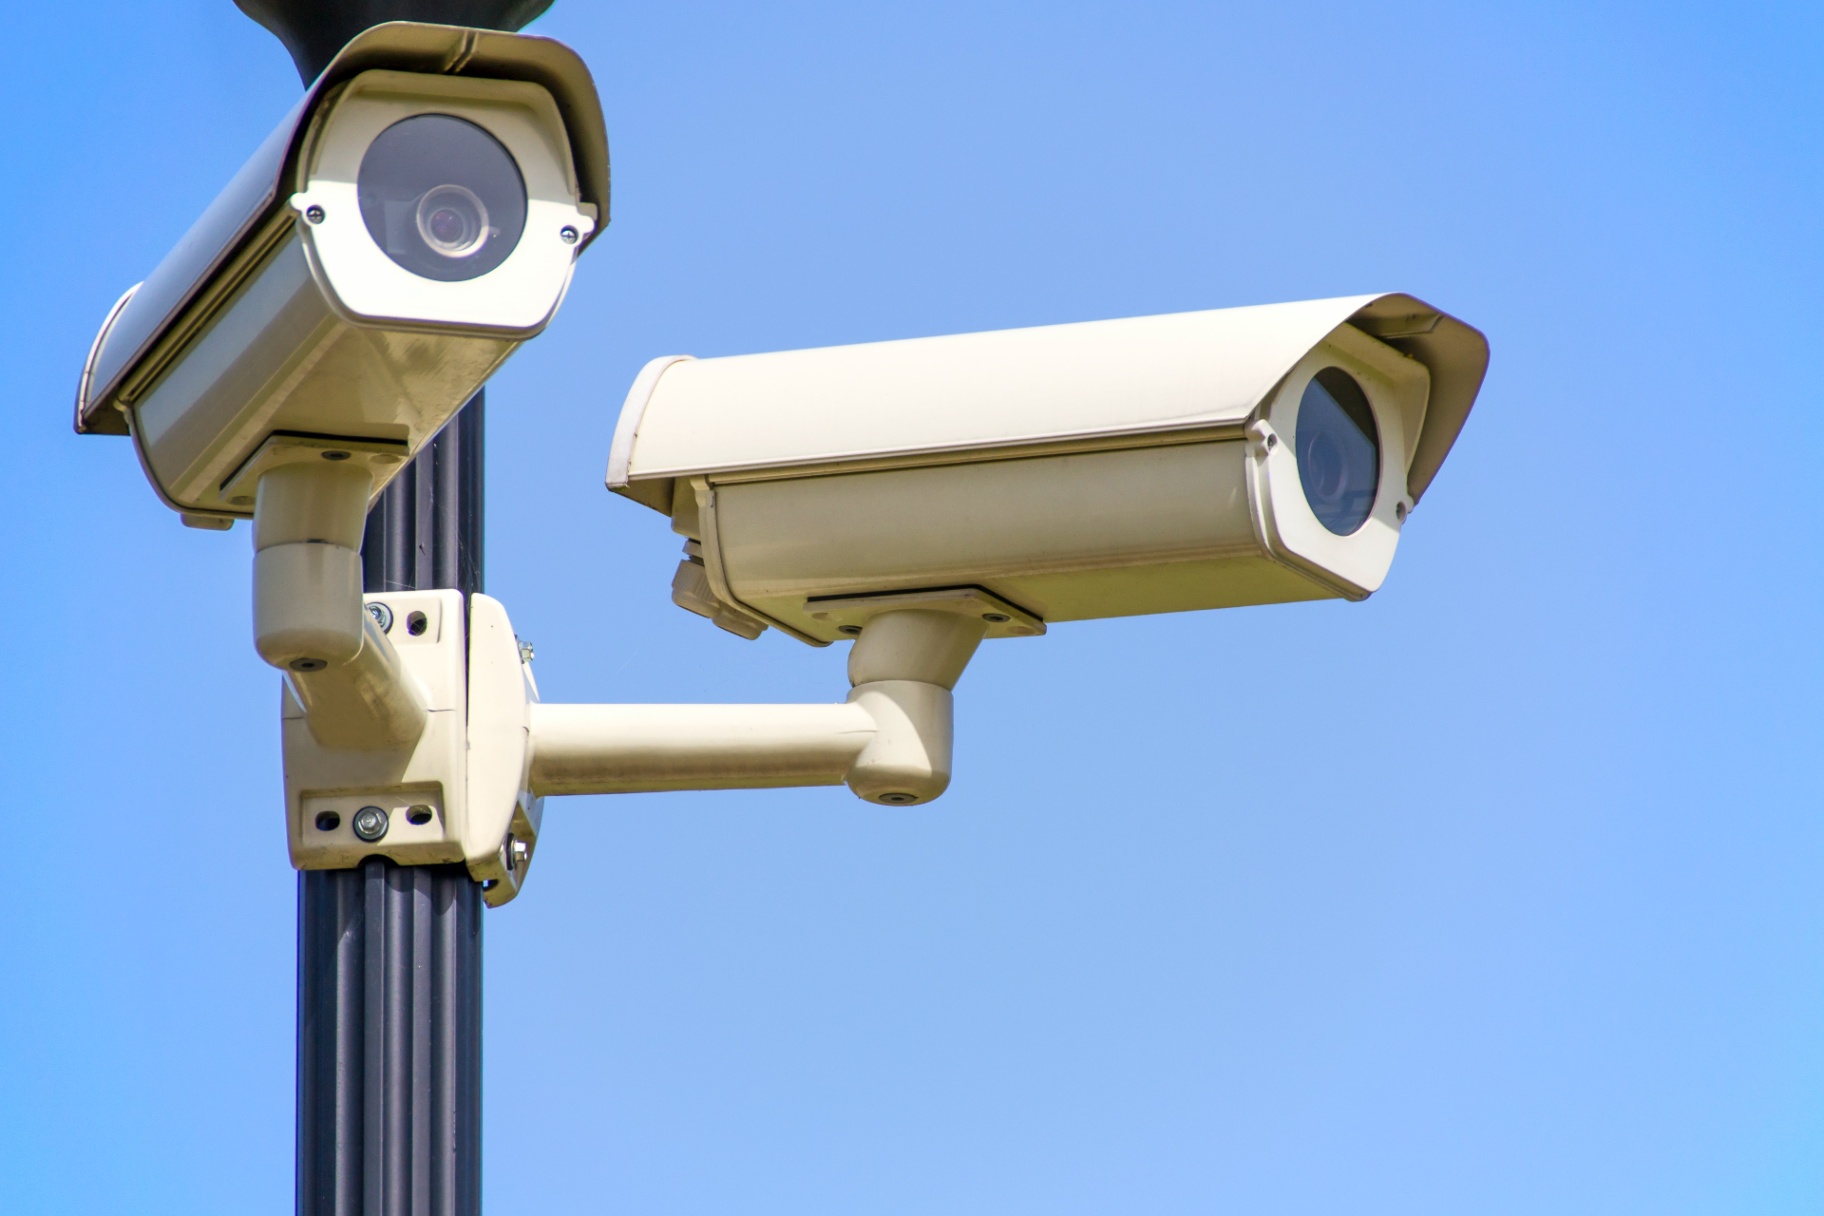 Surveillance cameras facing different directions on a pole